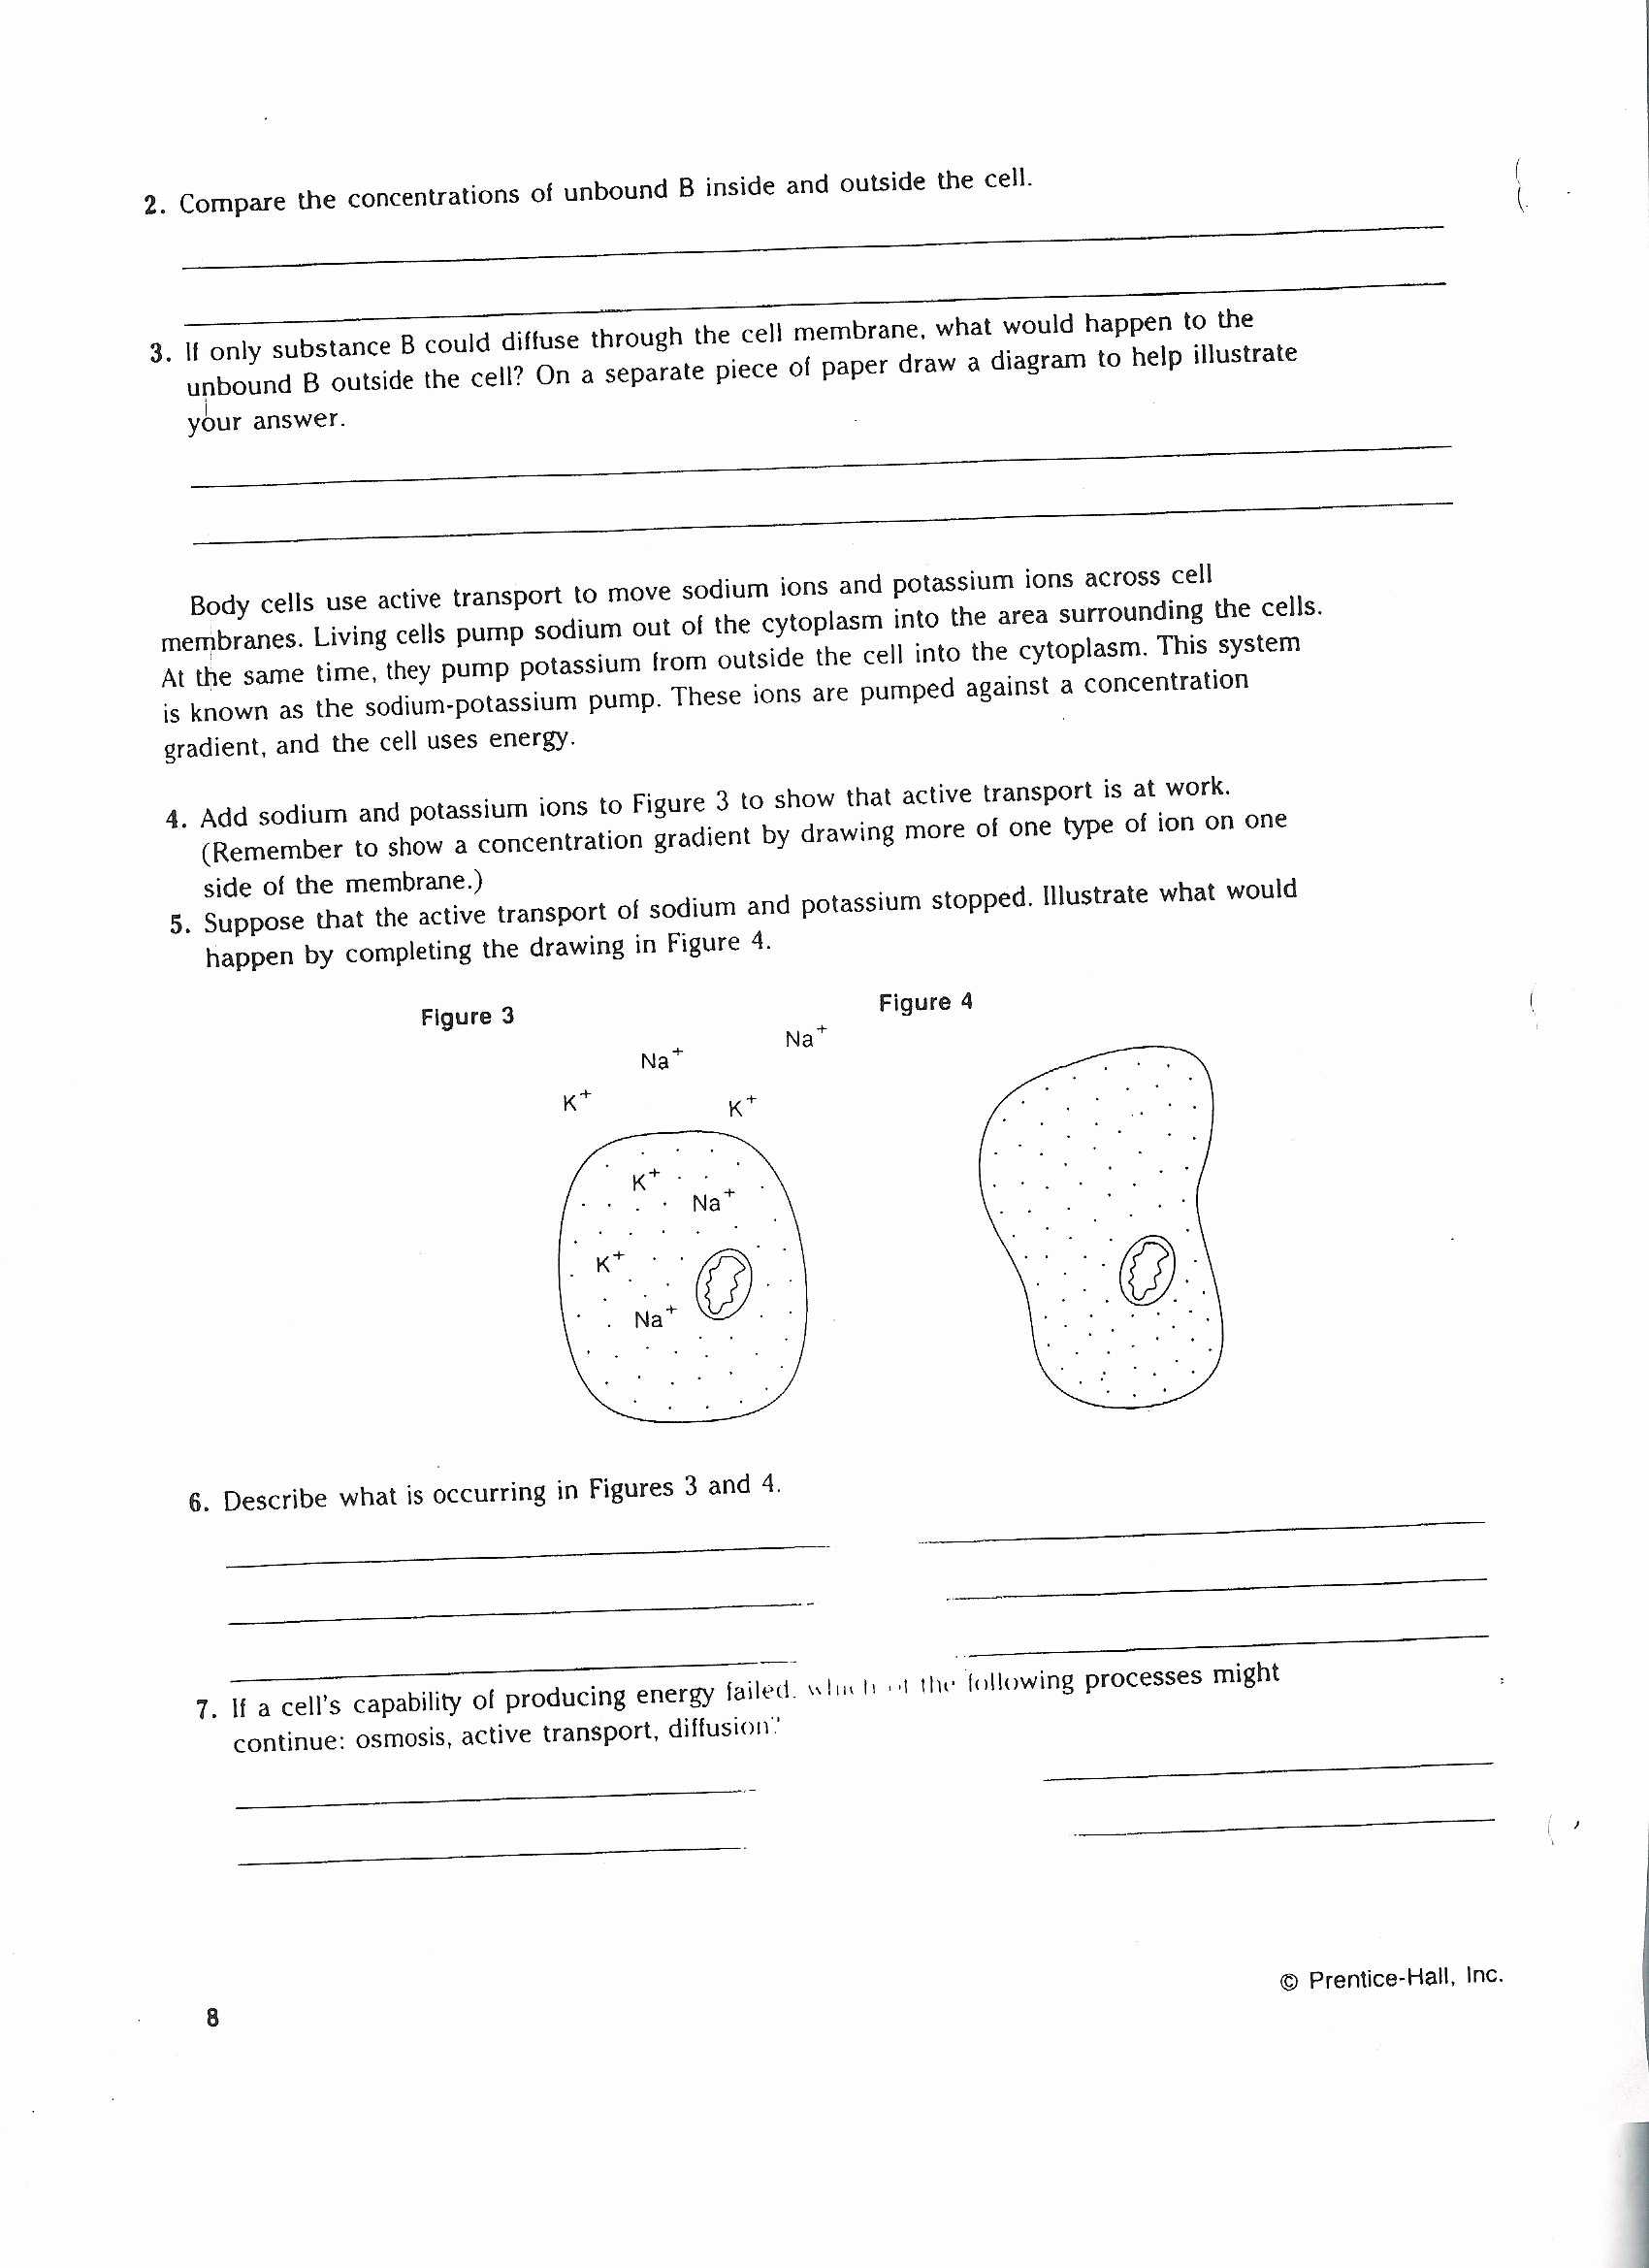 Cell Membrane and Transport Worksheet Answers Along with Cellular Transport and the Cell Cycle Worksheet Worksheet